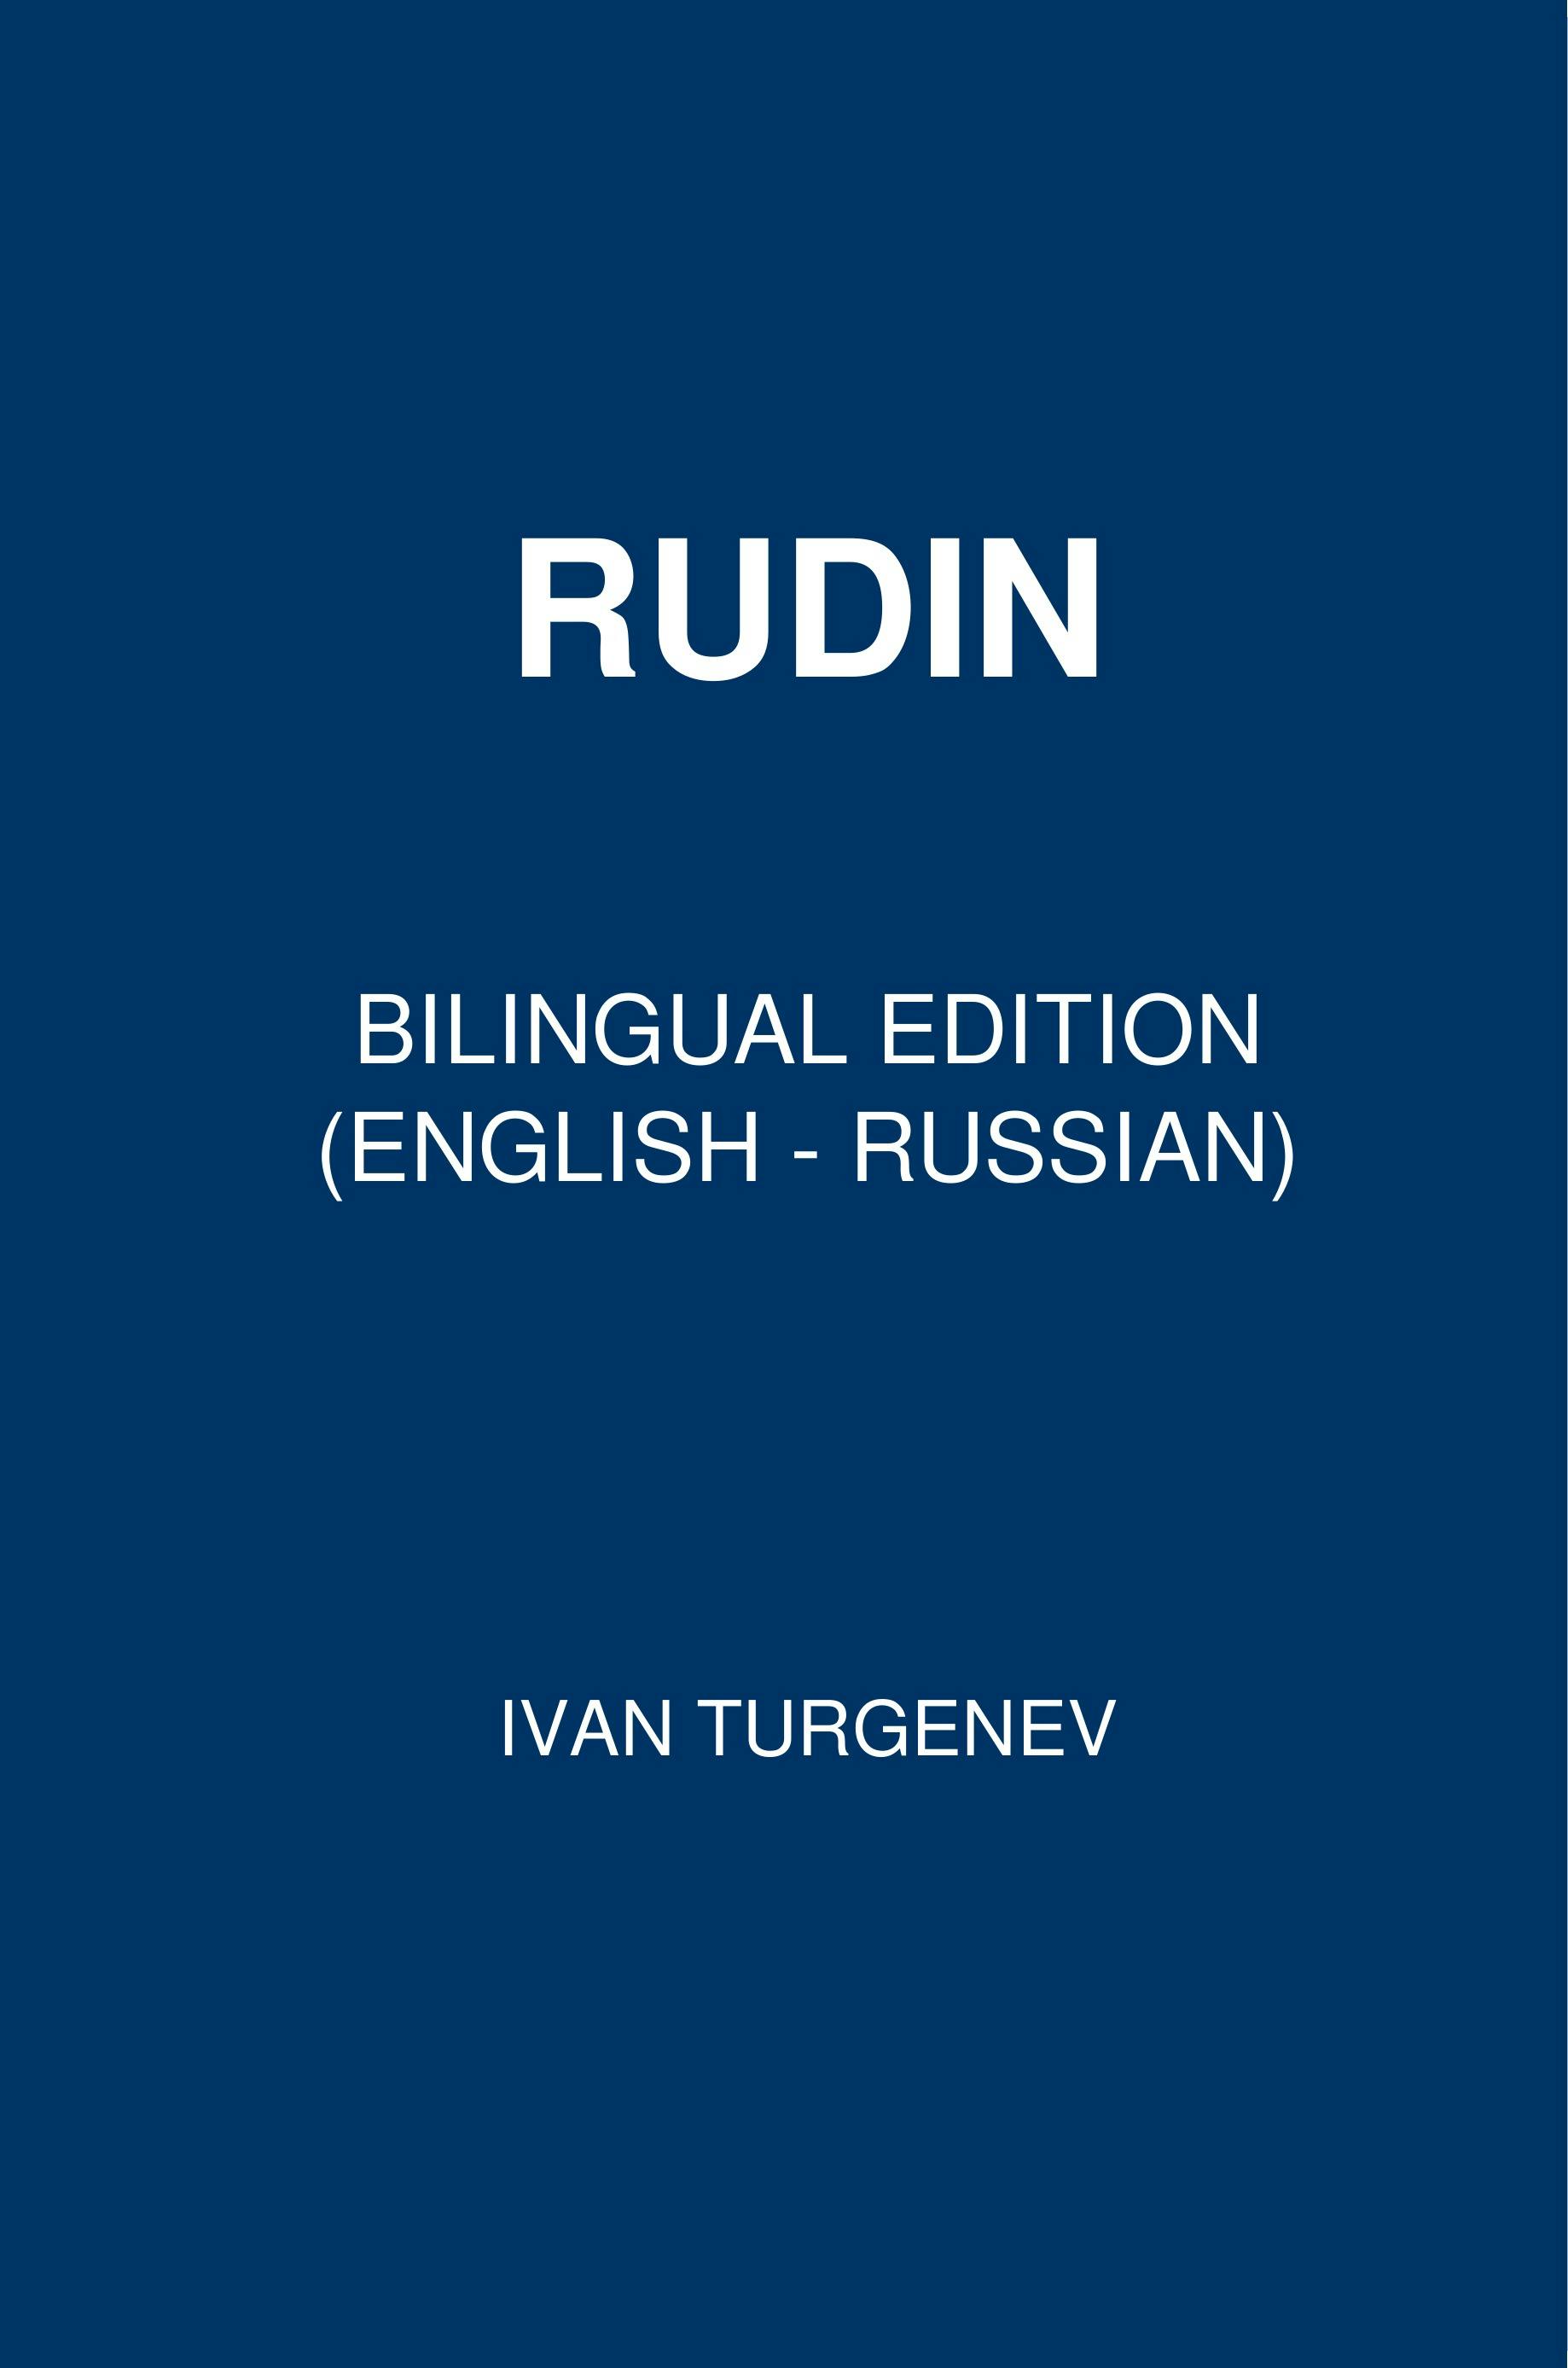 Rudin - undefined